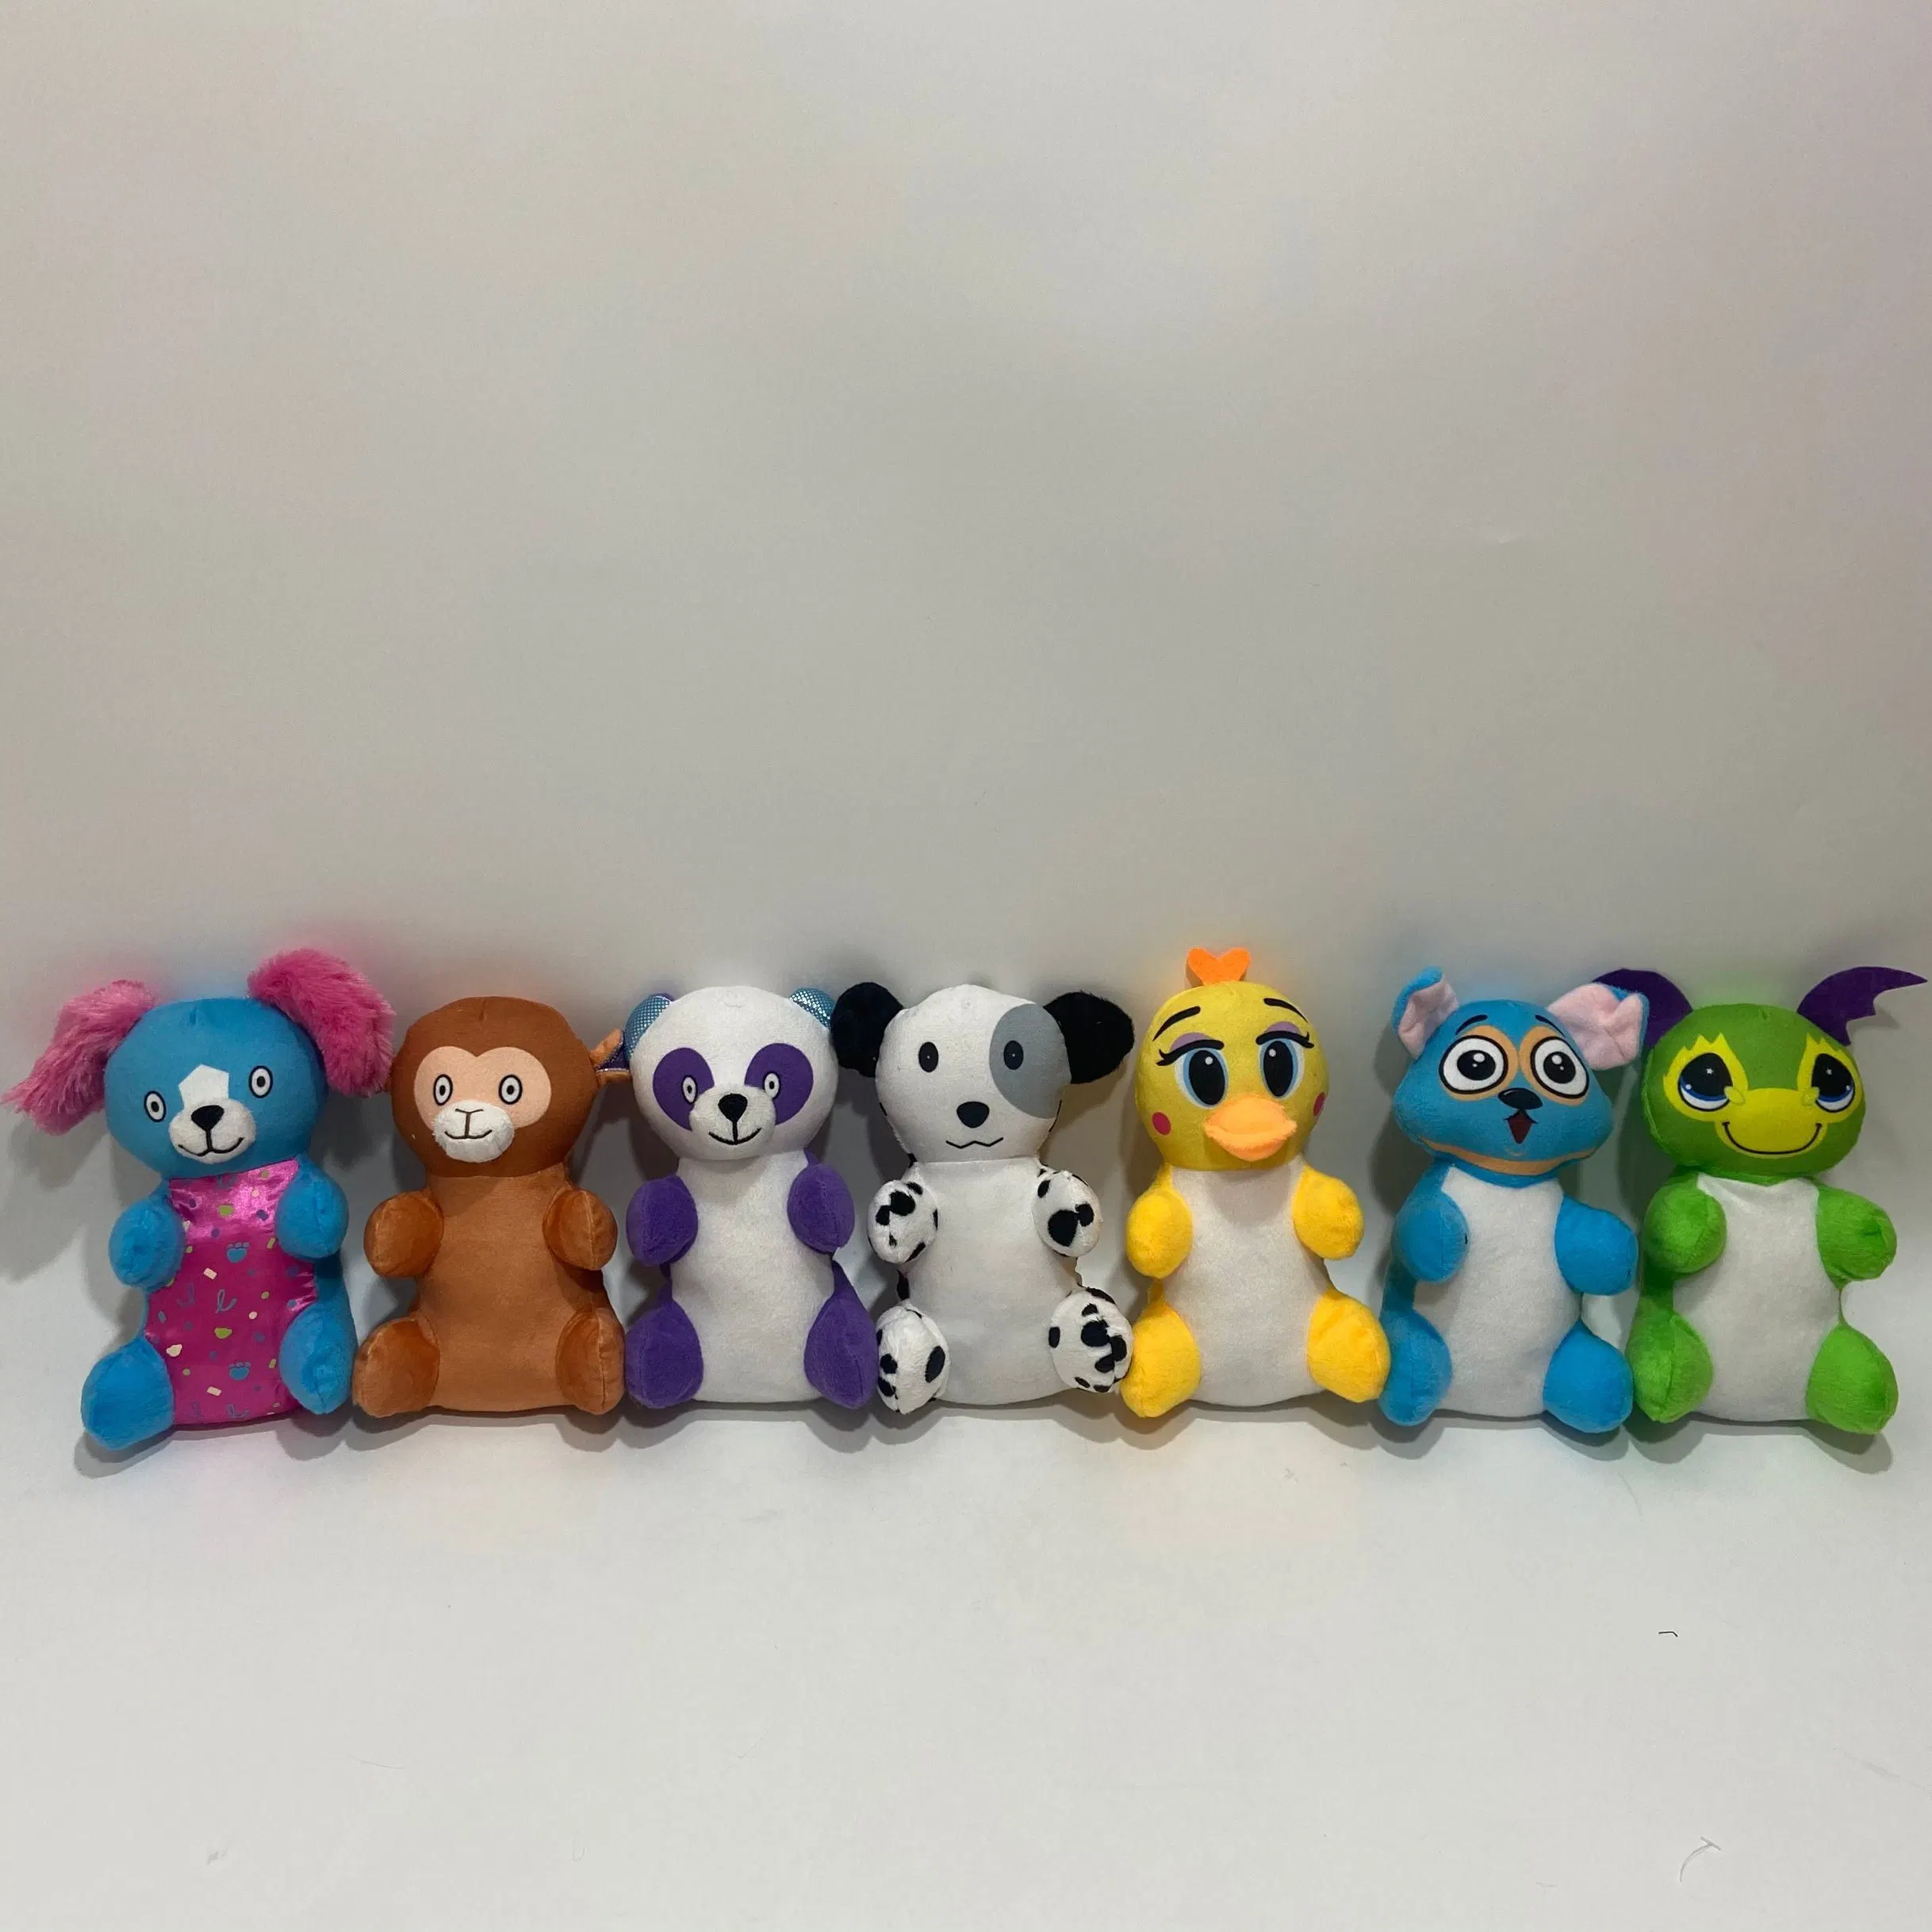 20 Cm Cheap Plush Animals Toy Assortment, Stuffed Animals in Bulk for Kids Party Favors